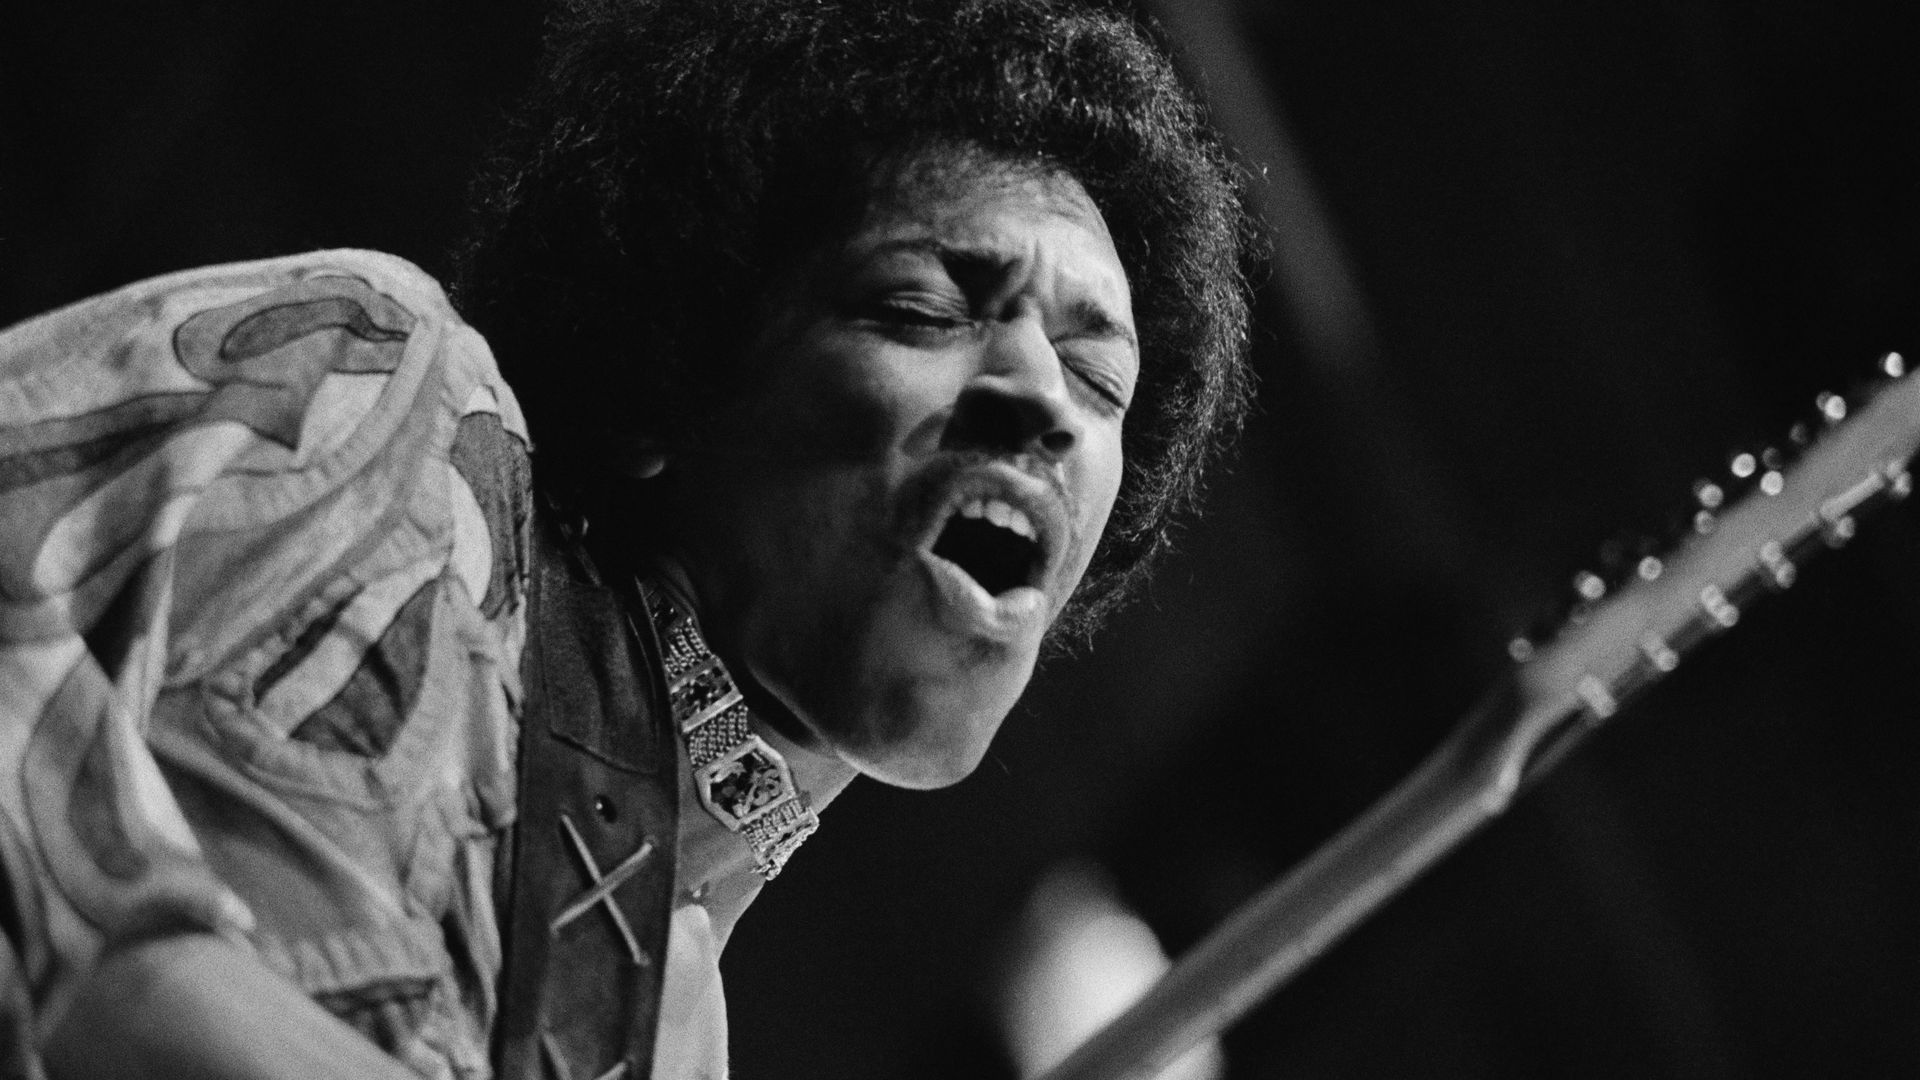 A black and white photo of Jimi Hendrix singing while playing guitar. His eyes are closed.